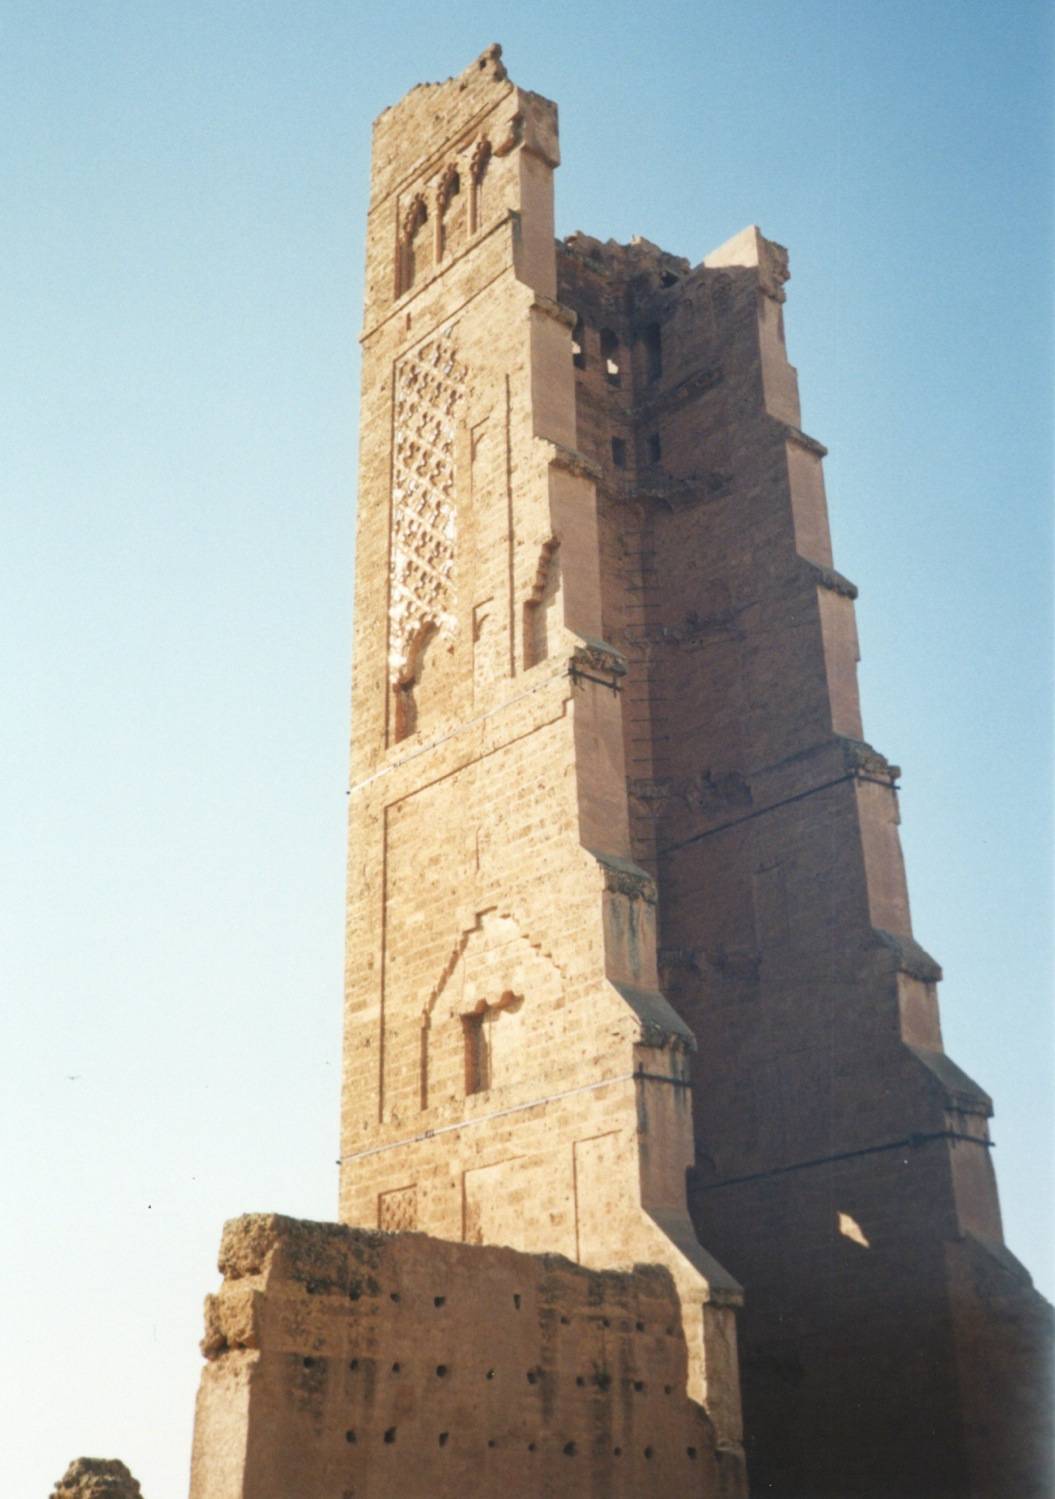 View of the minaret showing the interior